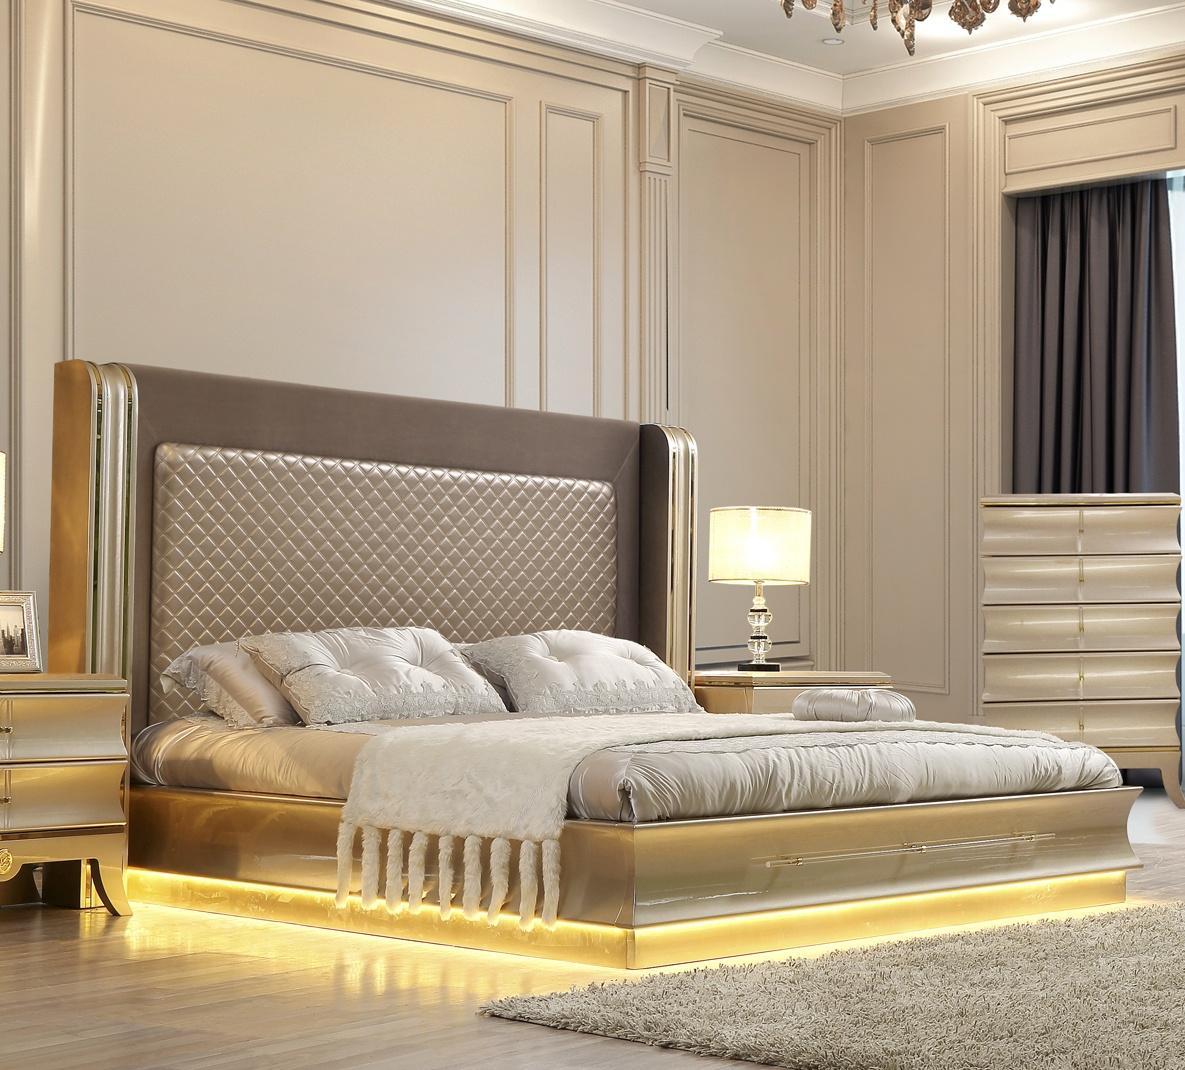 

    
Glam Belle Silver & Gold CAL King Bedroom Set 5Pcs Contemporary Homey Design HD-925
